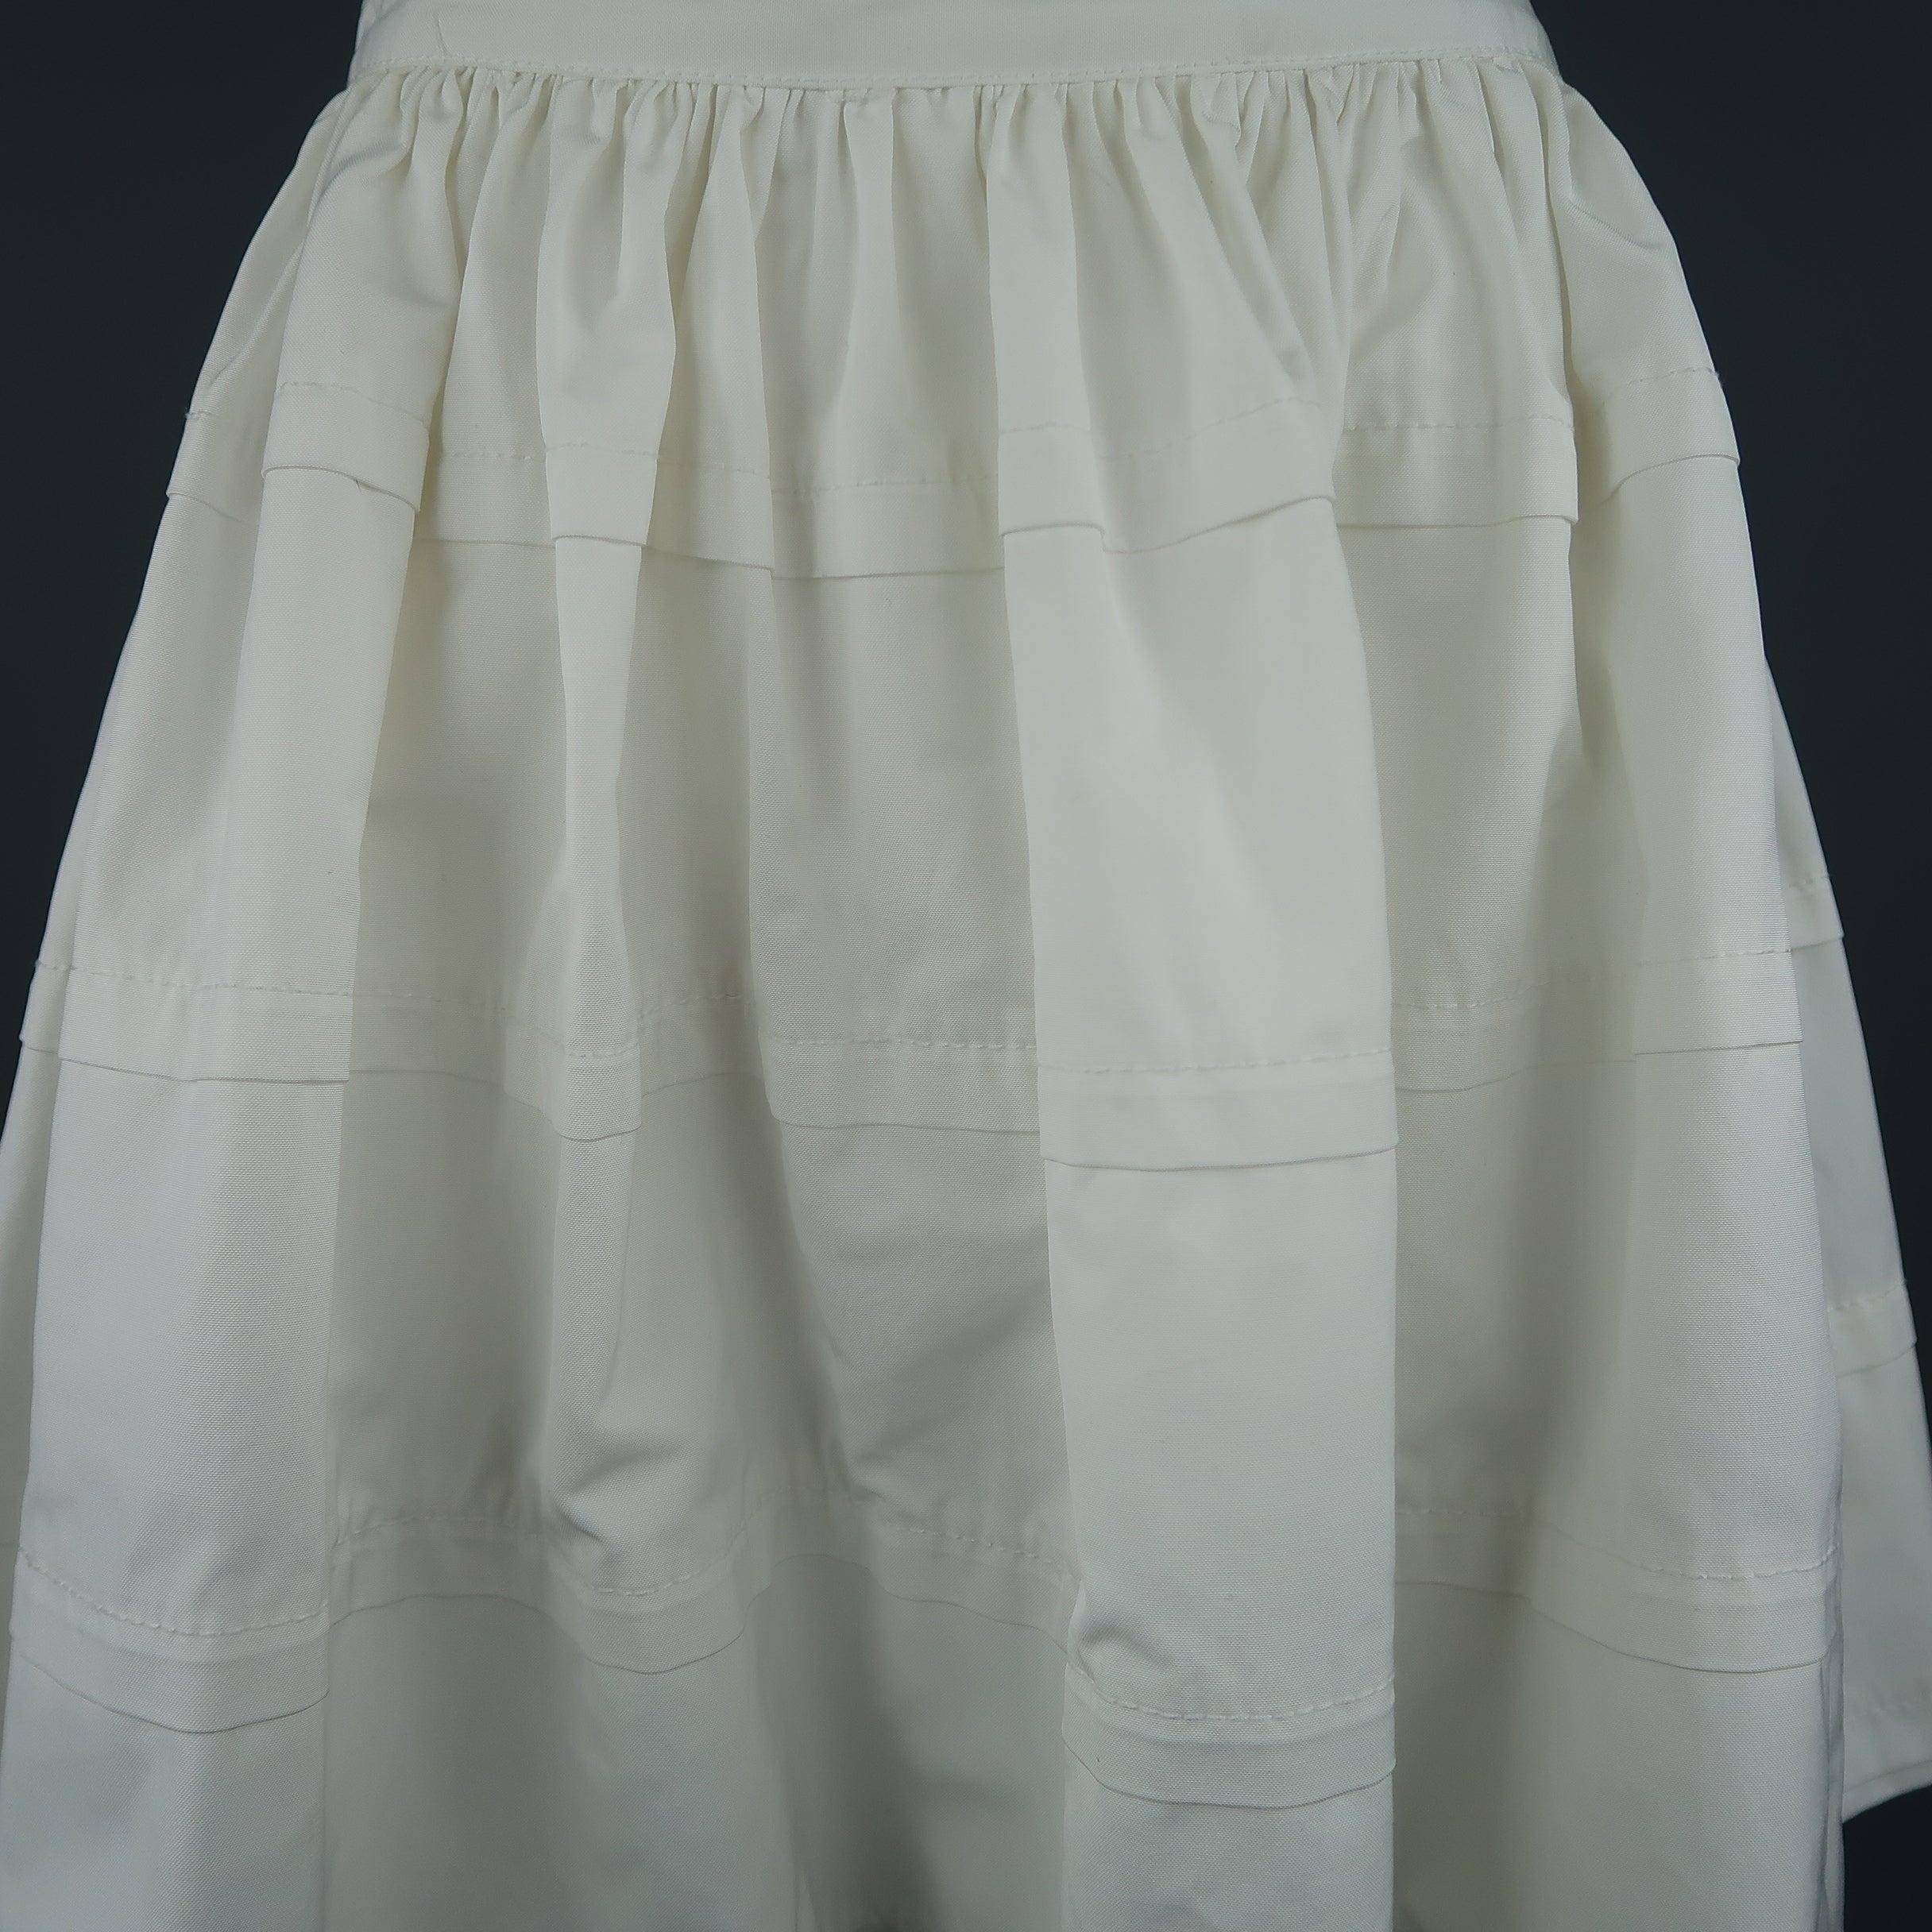 This RED VALENTINO mini petticoat skirt comes in a cotton blend canvas fabric and features a skinny waistband, gathered top and tiered layers. Made in Italy.
 Excellent Pre-Owned Condition.
  
 

 Marked:  6
  
 

 Measurements: 
  
 l Waist: 31